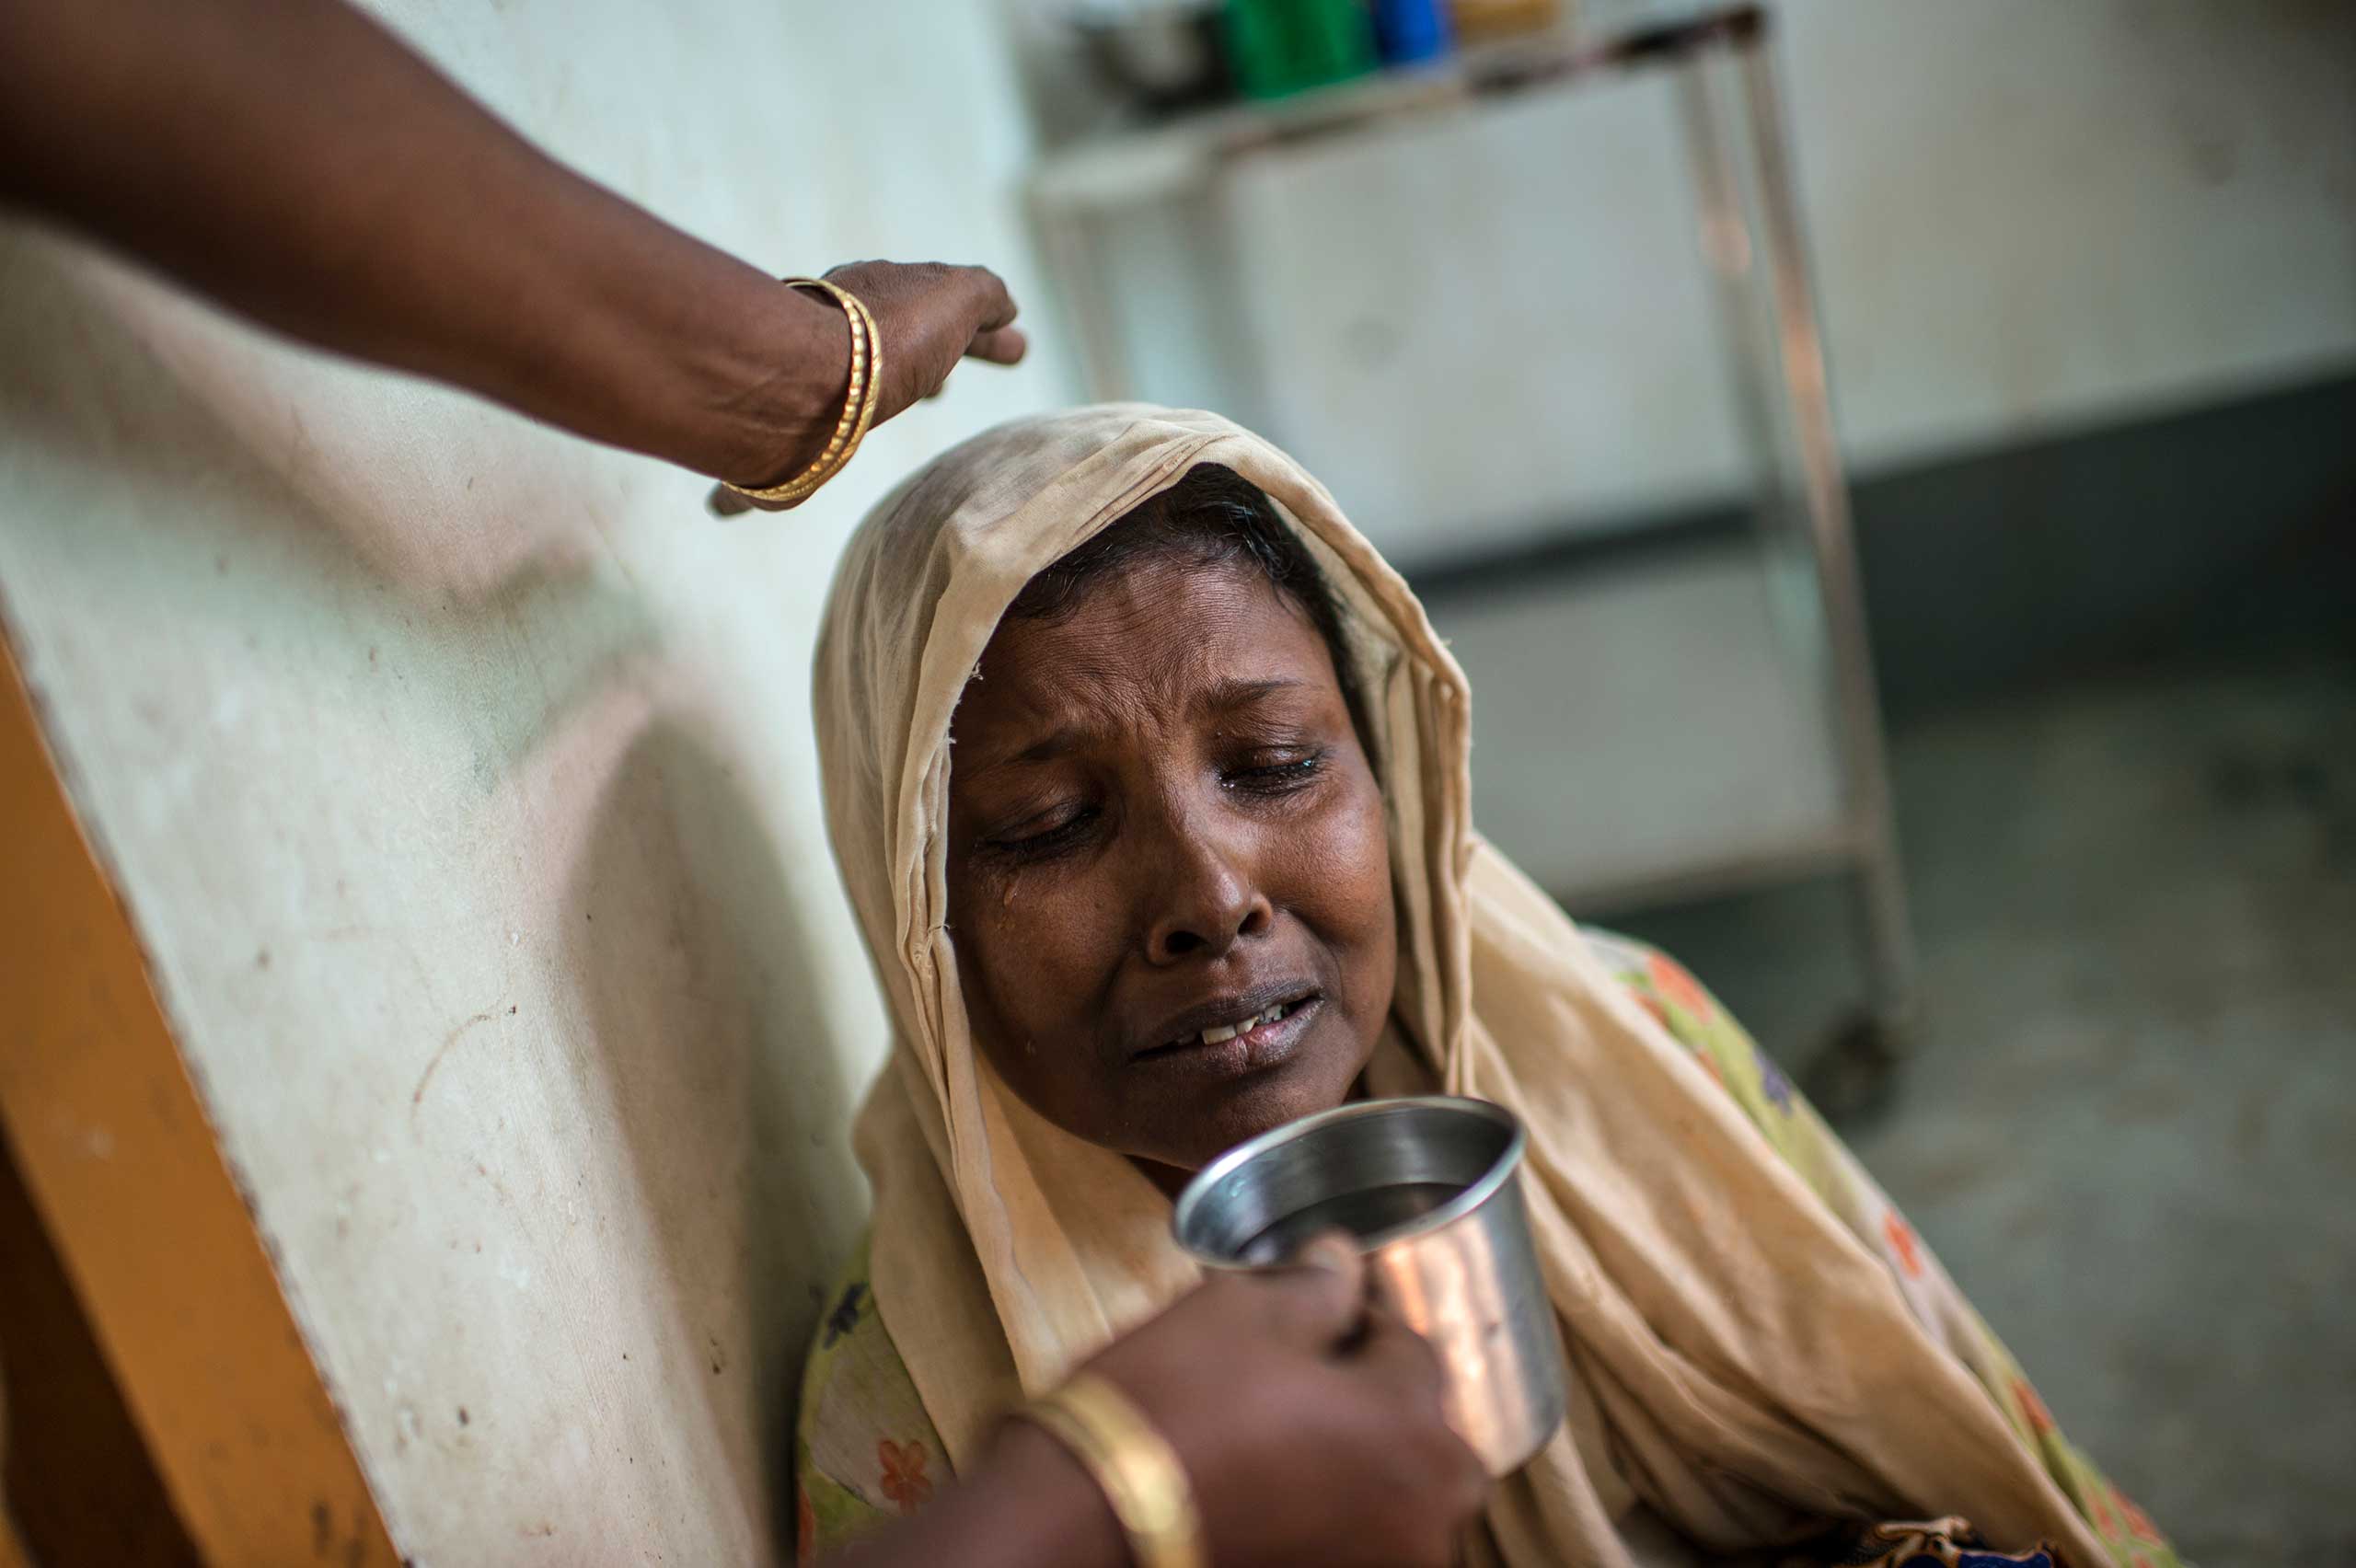 Moriam Katu, 50 years, who is gravely ill from severe asthma, is offered water as she struggles to breathe in the That Kay Pin Emergency Hospital in the camp for Internally Displaced Rohingya outside of Sittwe, in Myanmar, Nov. 25, 2015.  Moriam was so ill, she could barely breathe, and began coughing up blood. She visited the emergency hospital at the That Kay Pin within the IDP camp, and there were not sufficient resources to treat her there. The medical advisor offered to transfer her to the government hospital in Sittwe, but she declined, because her family did not have enough money to keep her there.  While her medical treatment would be free, her guardian would need to pay for food, which they estimated would be 20-30000 for food for a week. She declined and went back home. A few days later, she returned, and was transferred to Sittwe hospital, and died 10 days later.